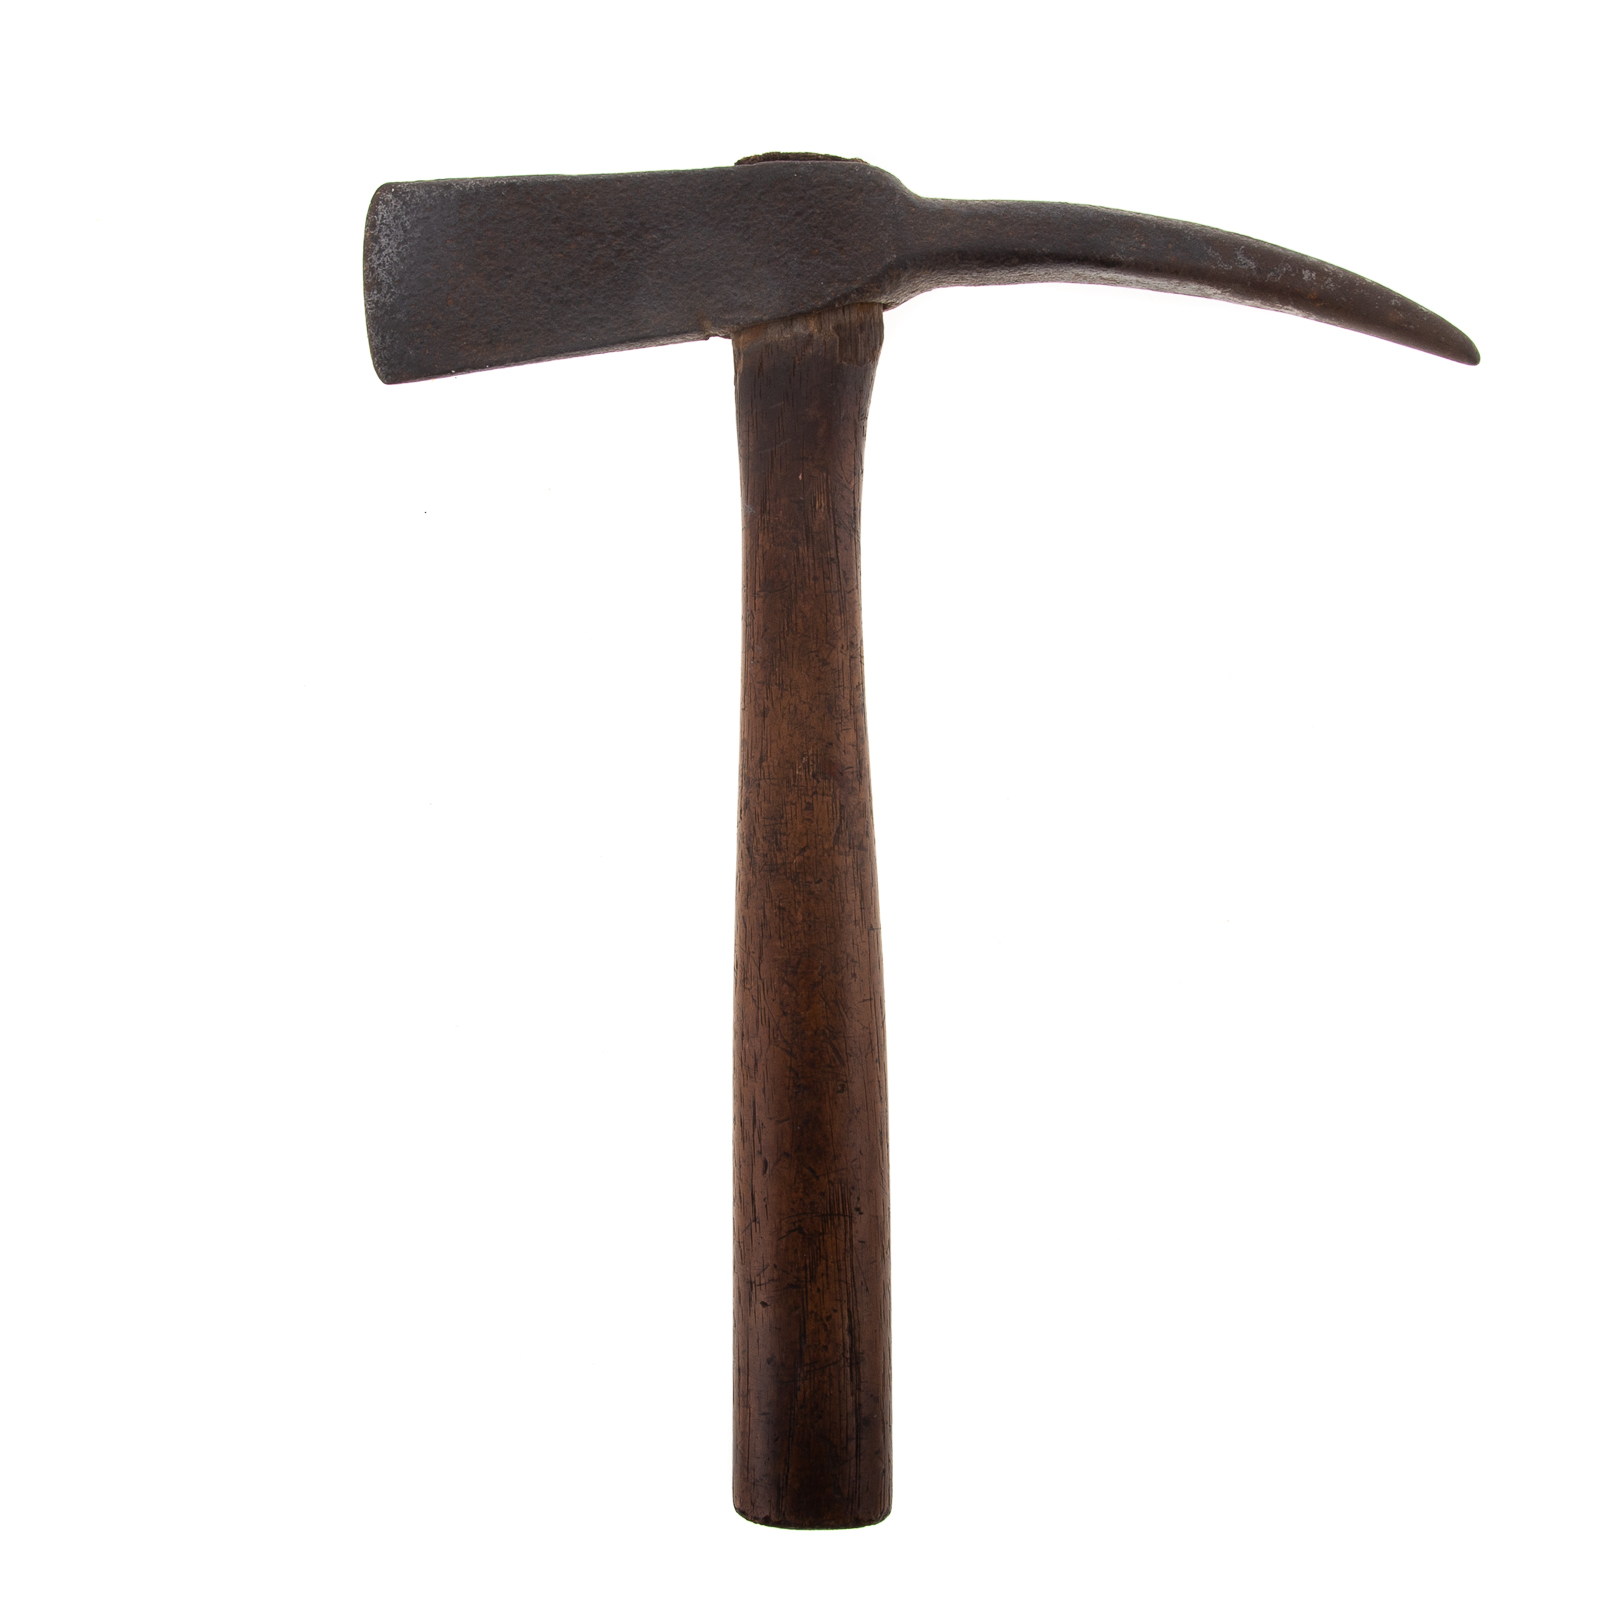 AMERICAN SPIKED TOMAHAWK, MID 18TH